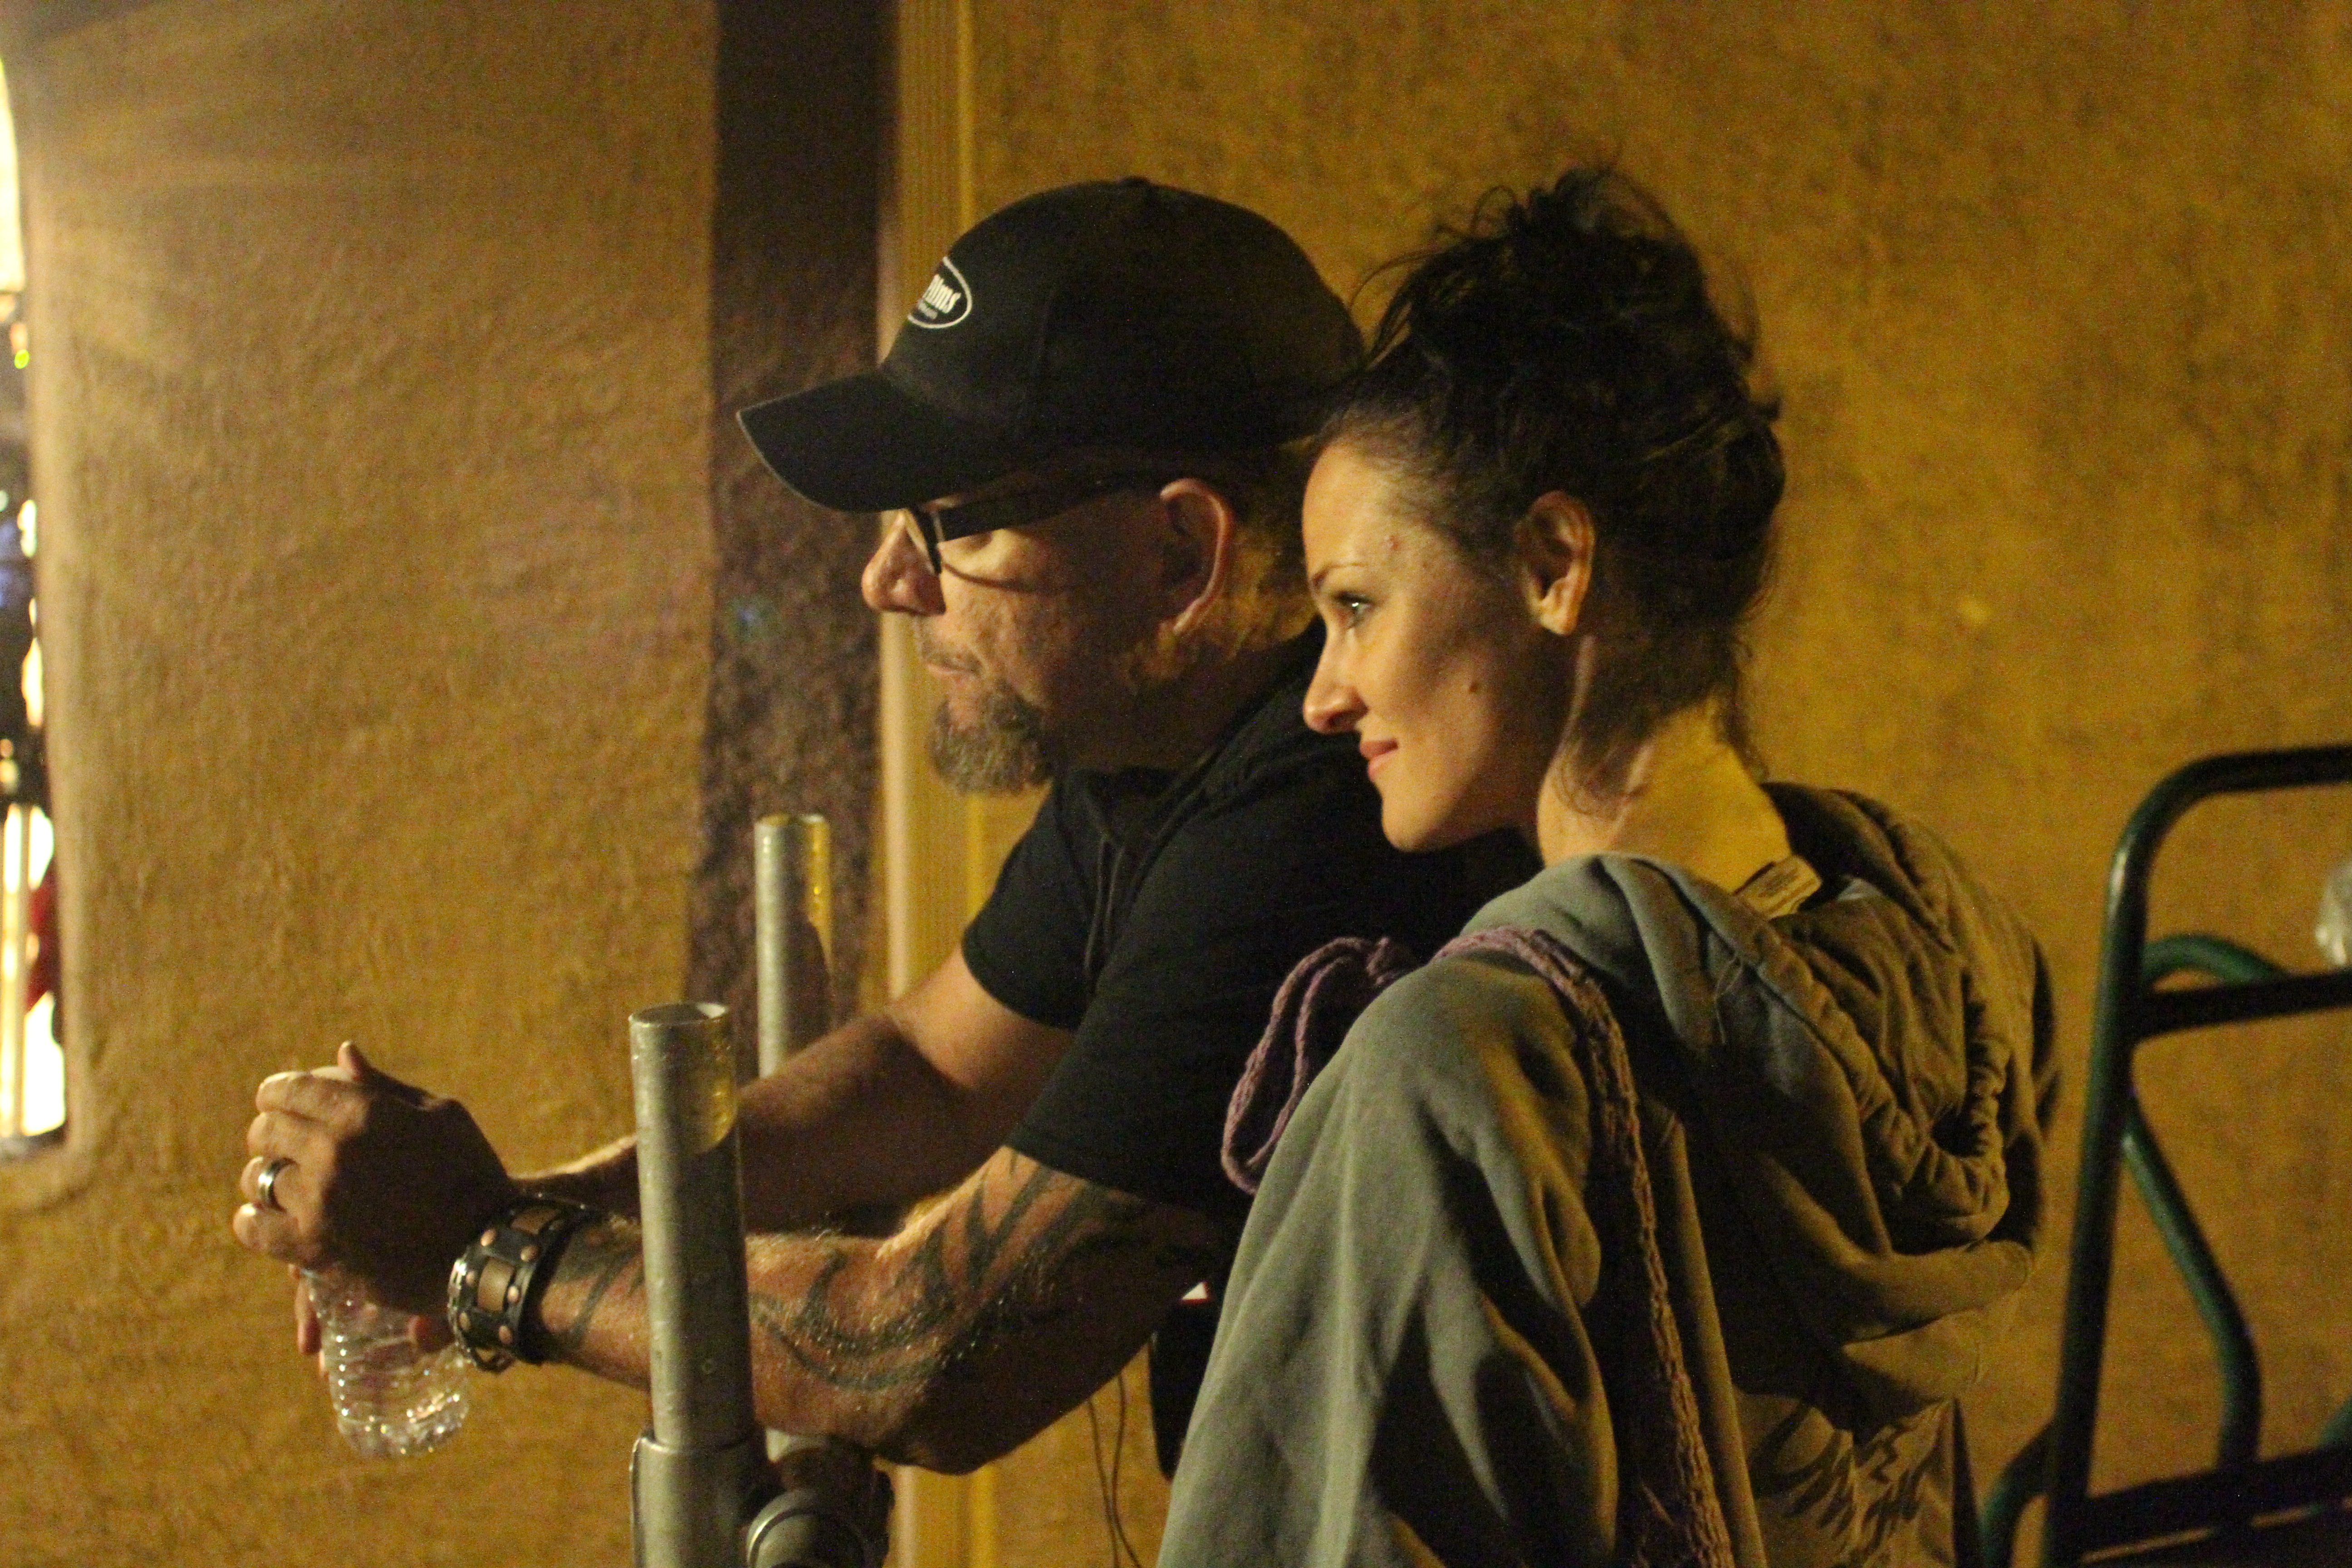 Jeff and his wife, Christie, on the set of Dead In 5 Heartbeats